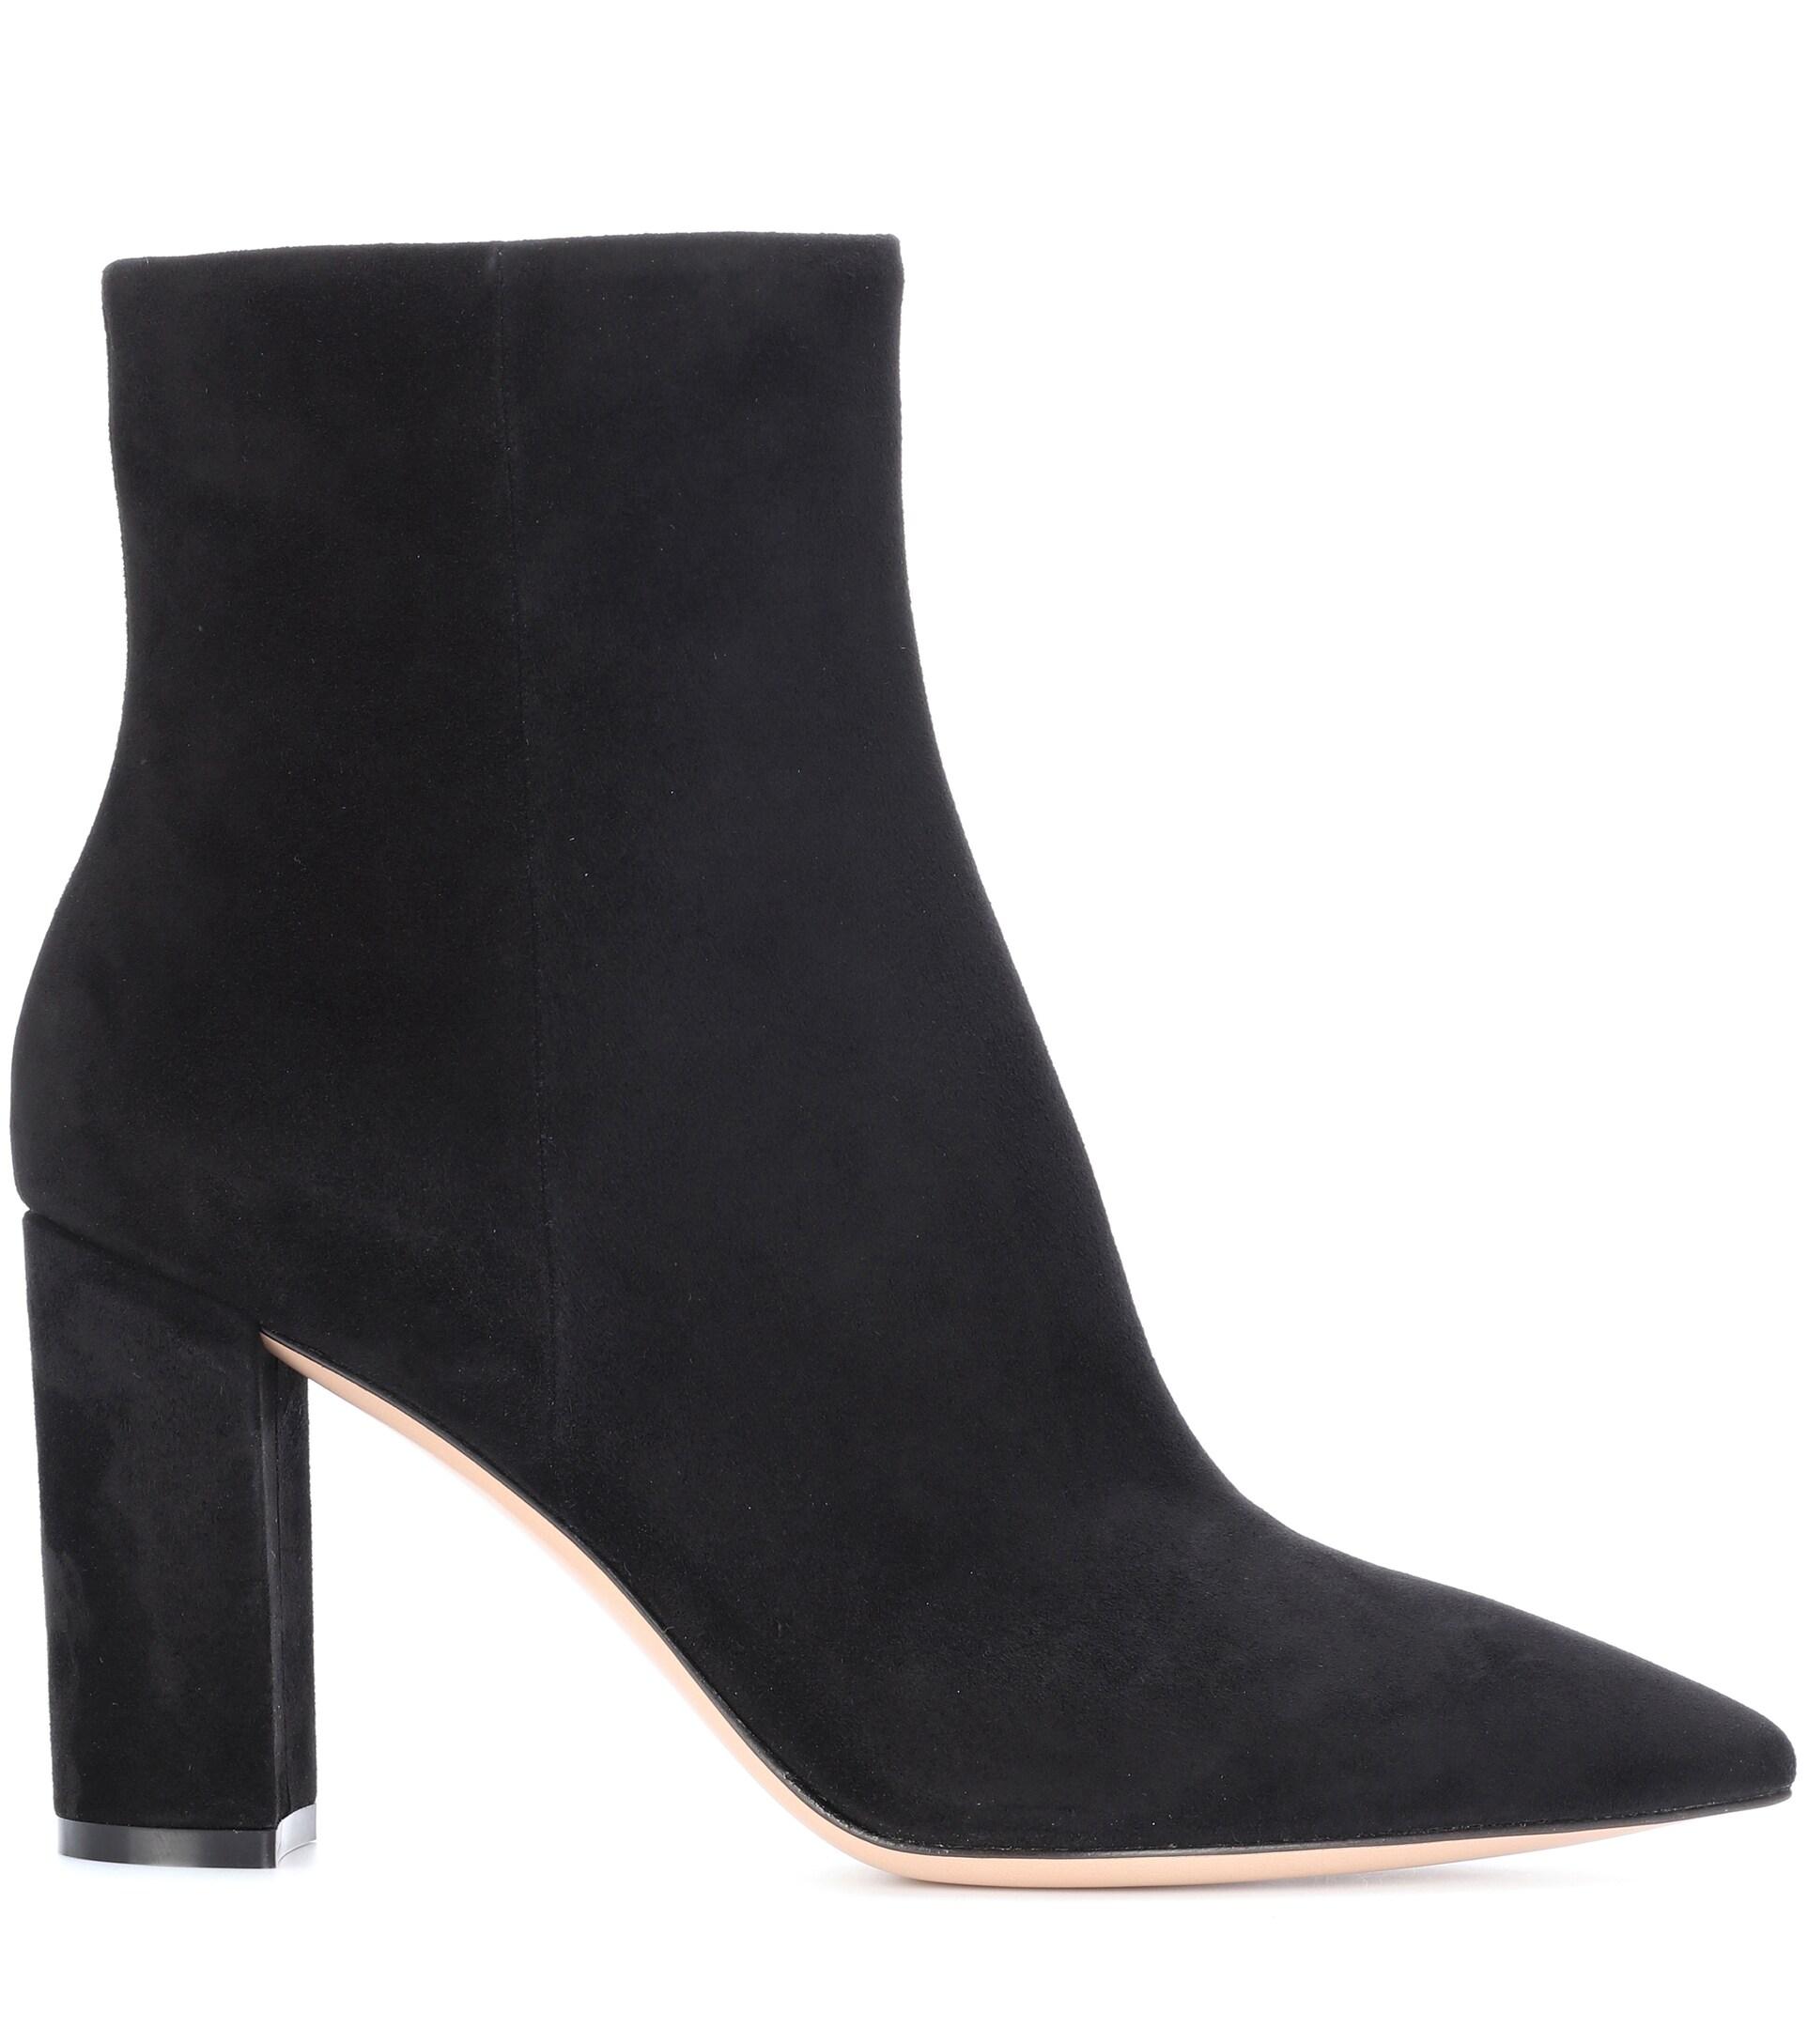 Save 11% Gianvito Rossi Piper 85 Suede Ankle Boots in Black Womens Shoes Boots Heel and high heel boots 